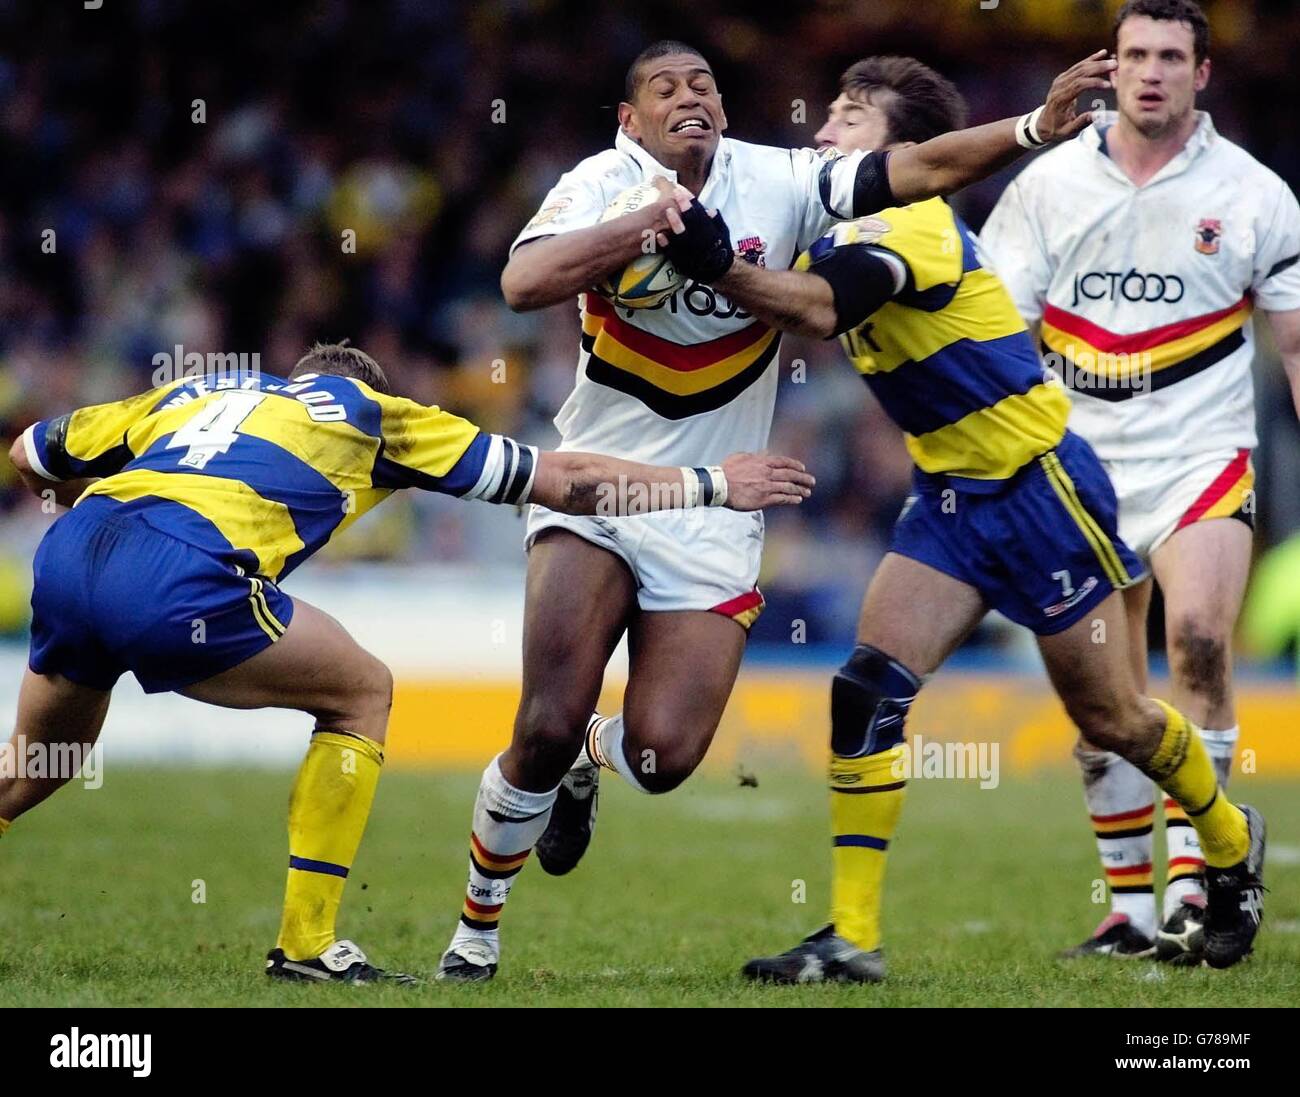 Bradford's Leon Pryce (centre) breaks through the tackles from Warrington's Ben Westwood (left) and Nat Wood during their Powergen Challenge Cup Fourth Round match at the Wilderspool stadium, Warrington. Stock Photo